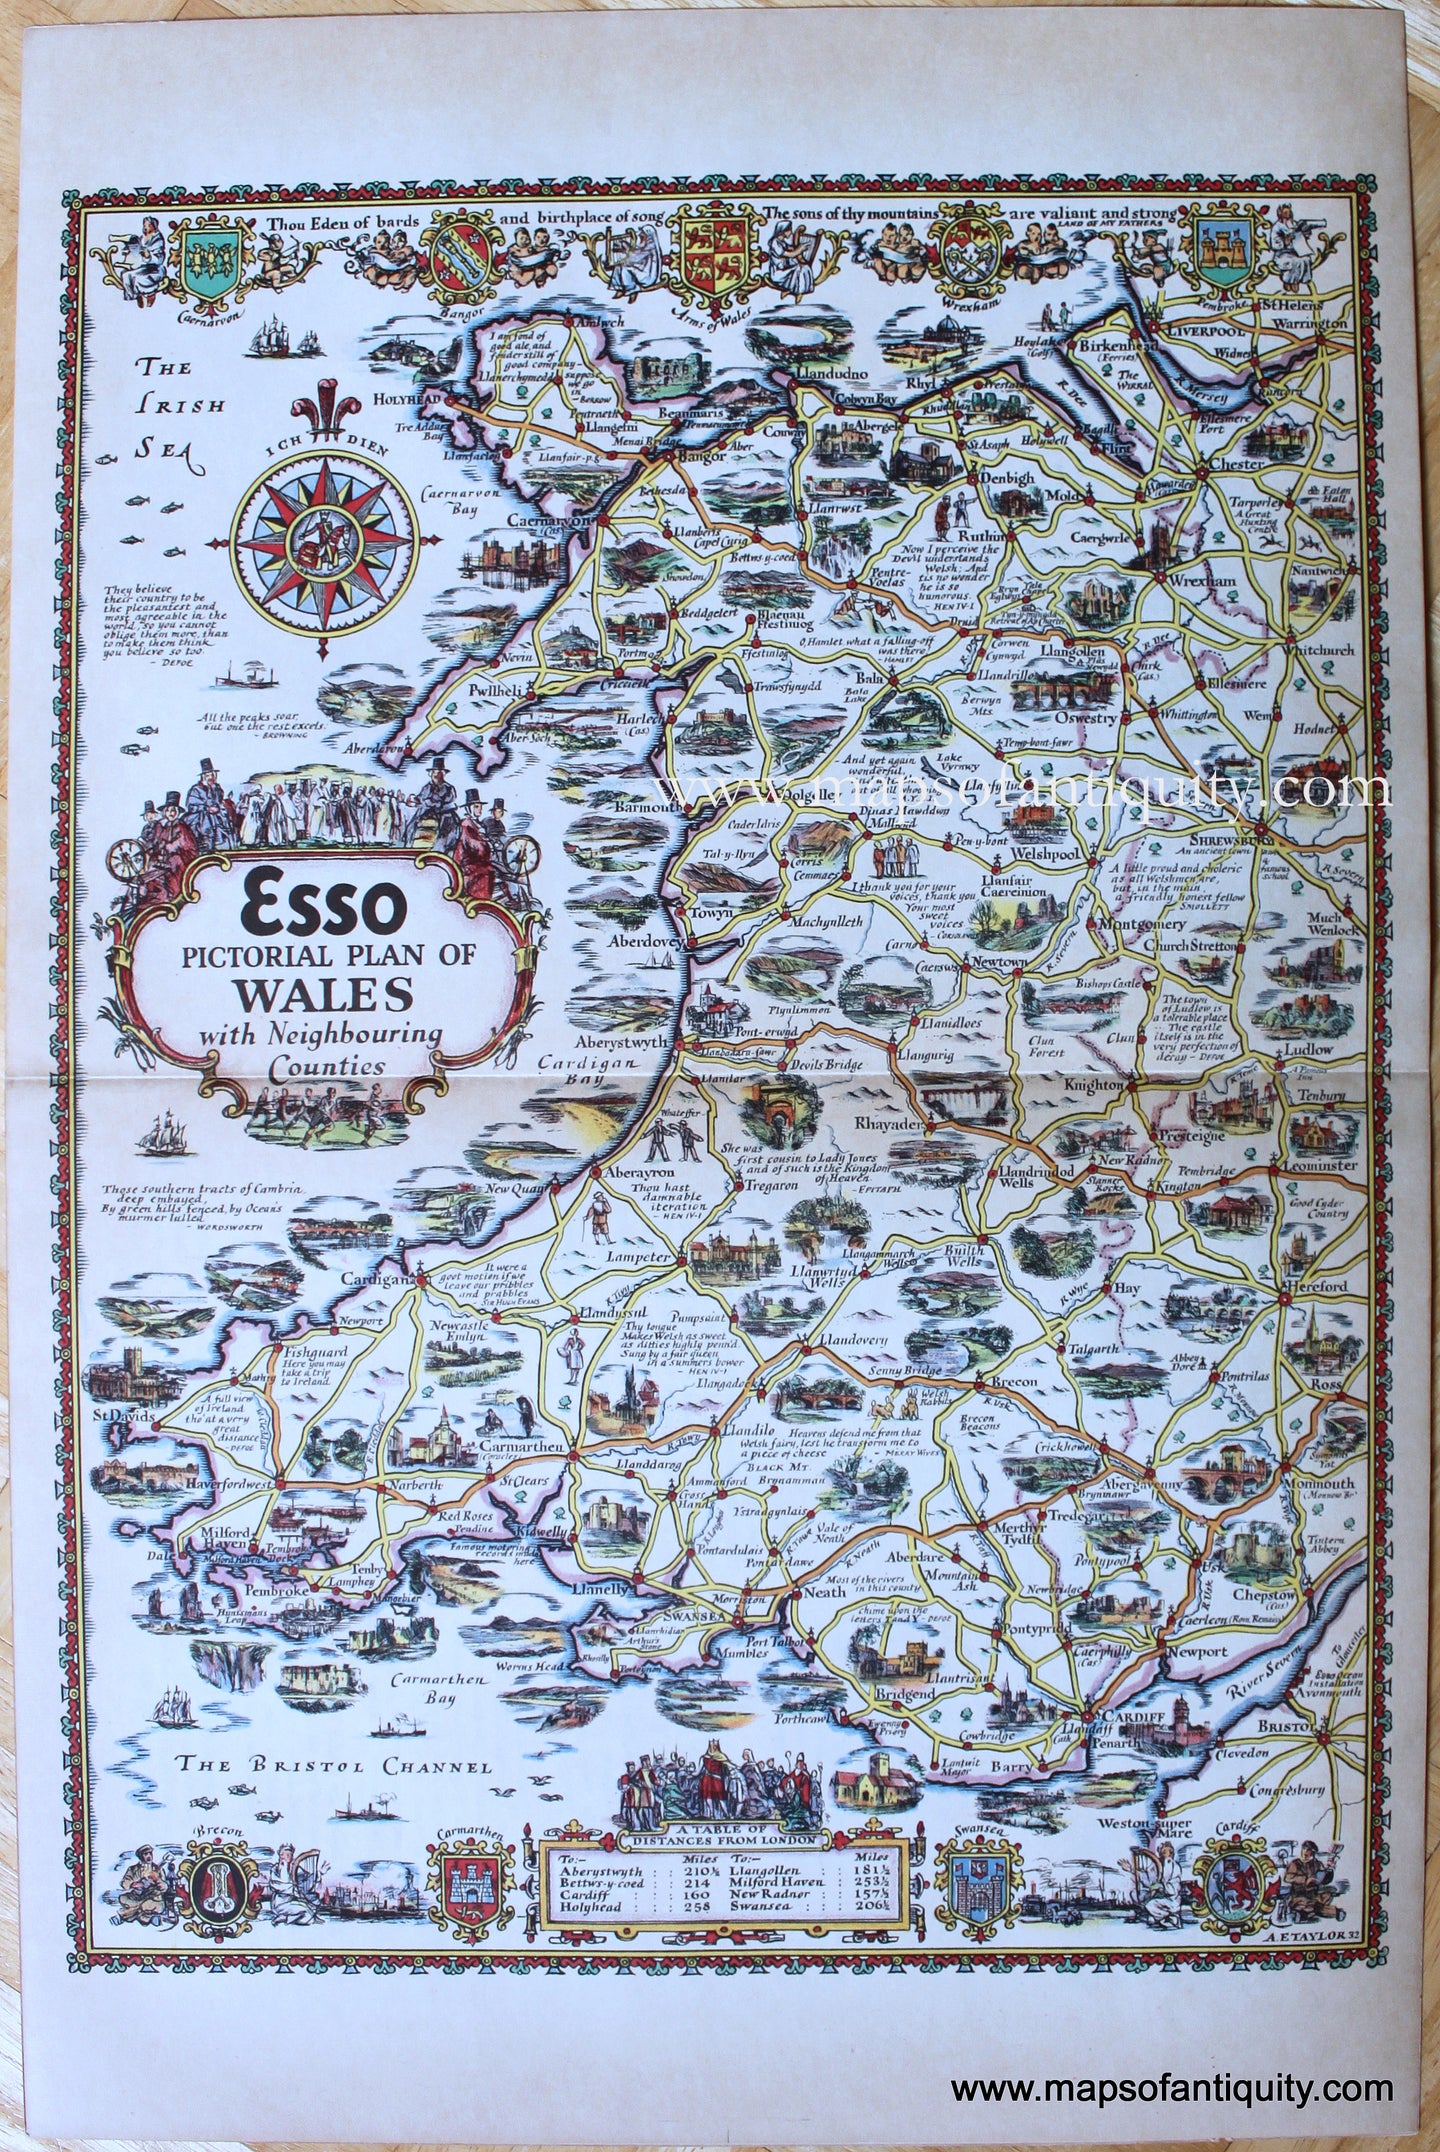 Genuine-Antique-Pictorial-Map-Esso-Pictorial-Plan-of-Wales-with-Neighbouring-Counties-1932-A.E.-Taylor-Maps-Of-Antiquity